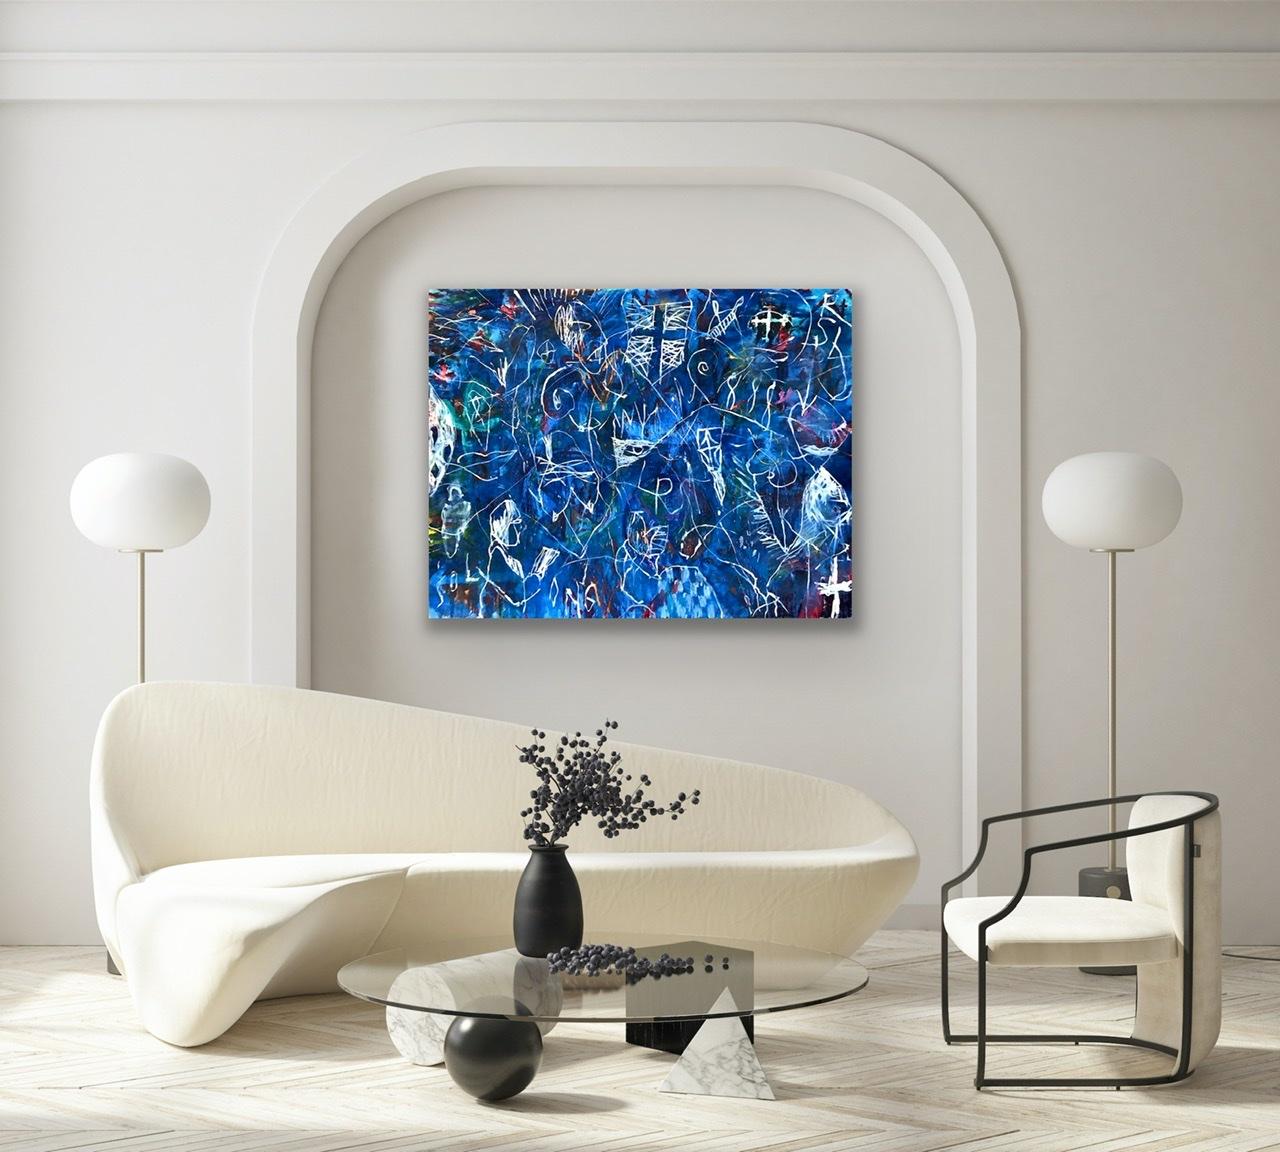 New Blue - Neo-Expressionist Mixed Media Art by Ford Crull